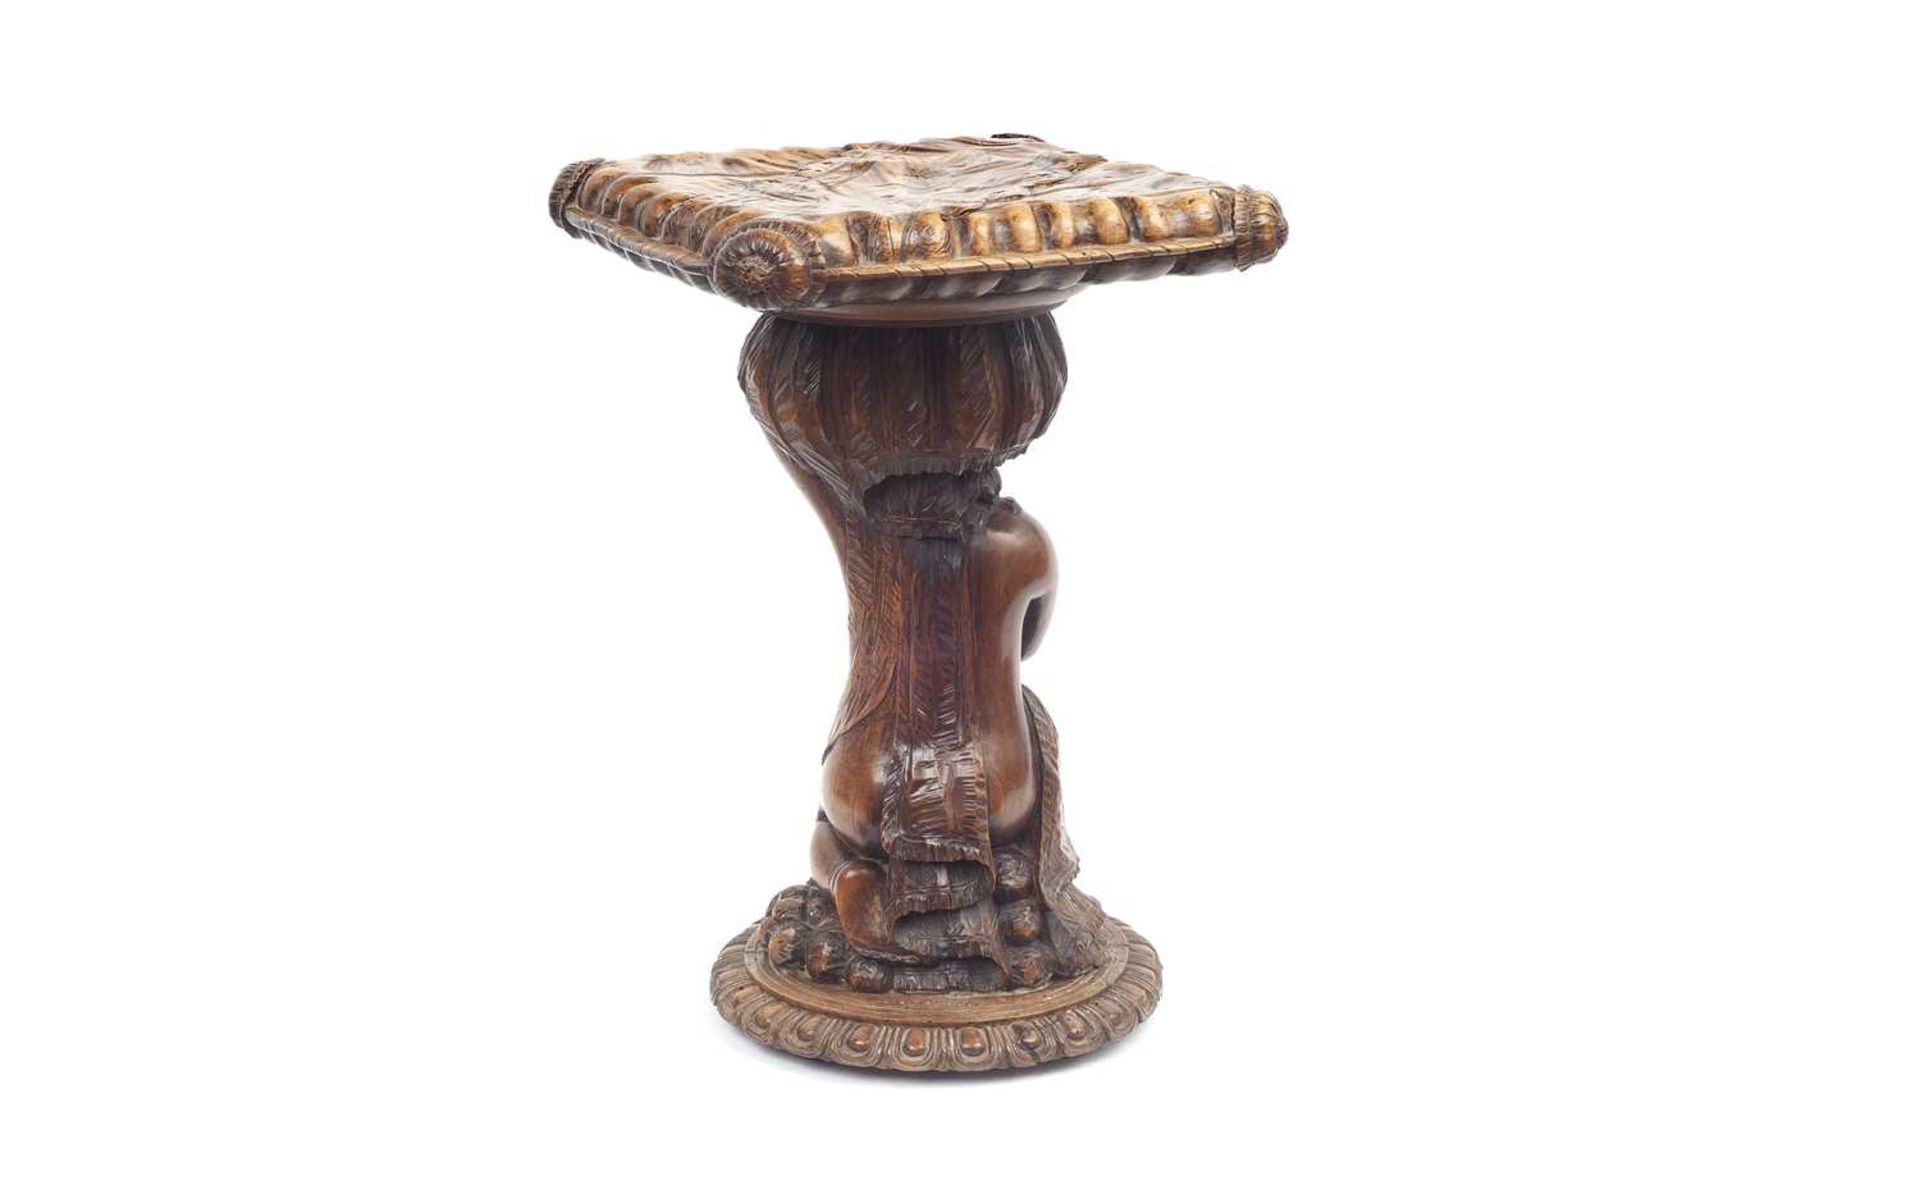 A LATE 19TH CENTURY ITALIAN WALNUT STAND CARVED WITH A PUTTO - Image 2 of 3